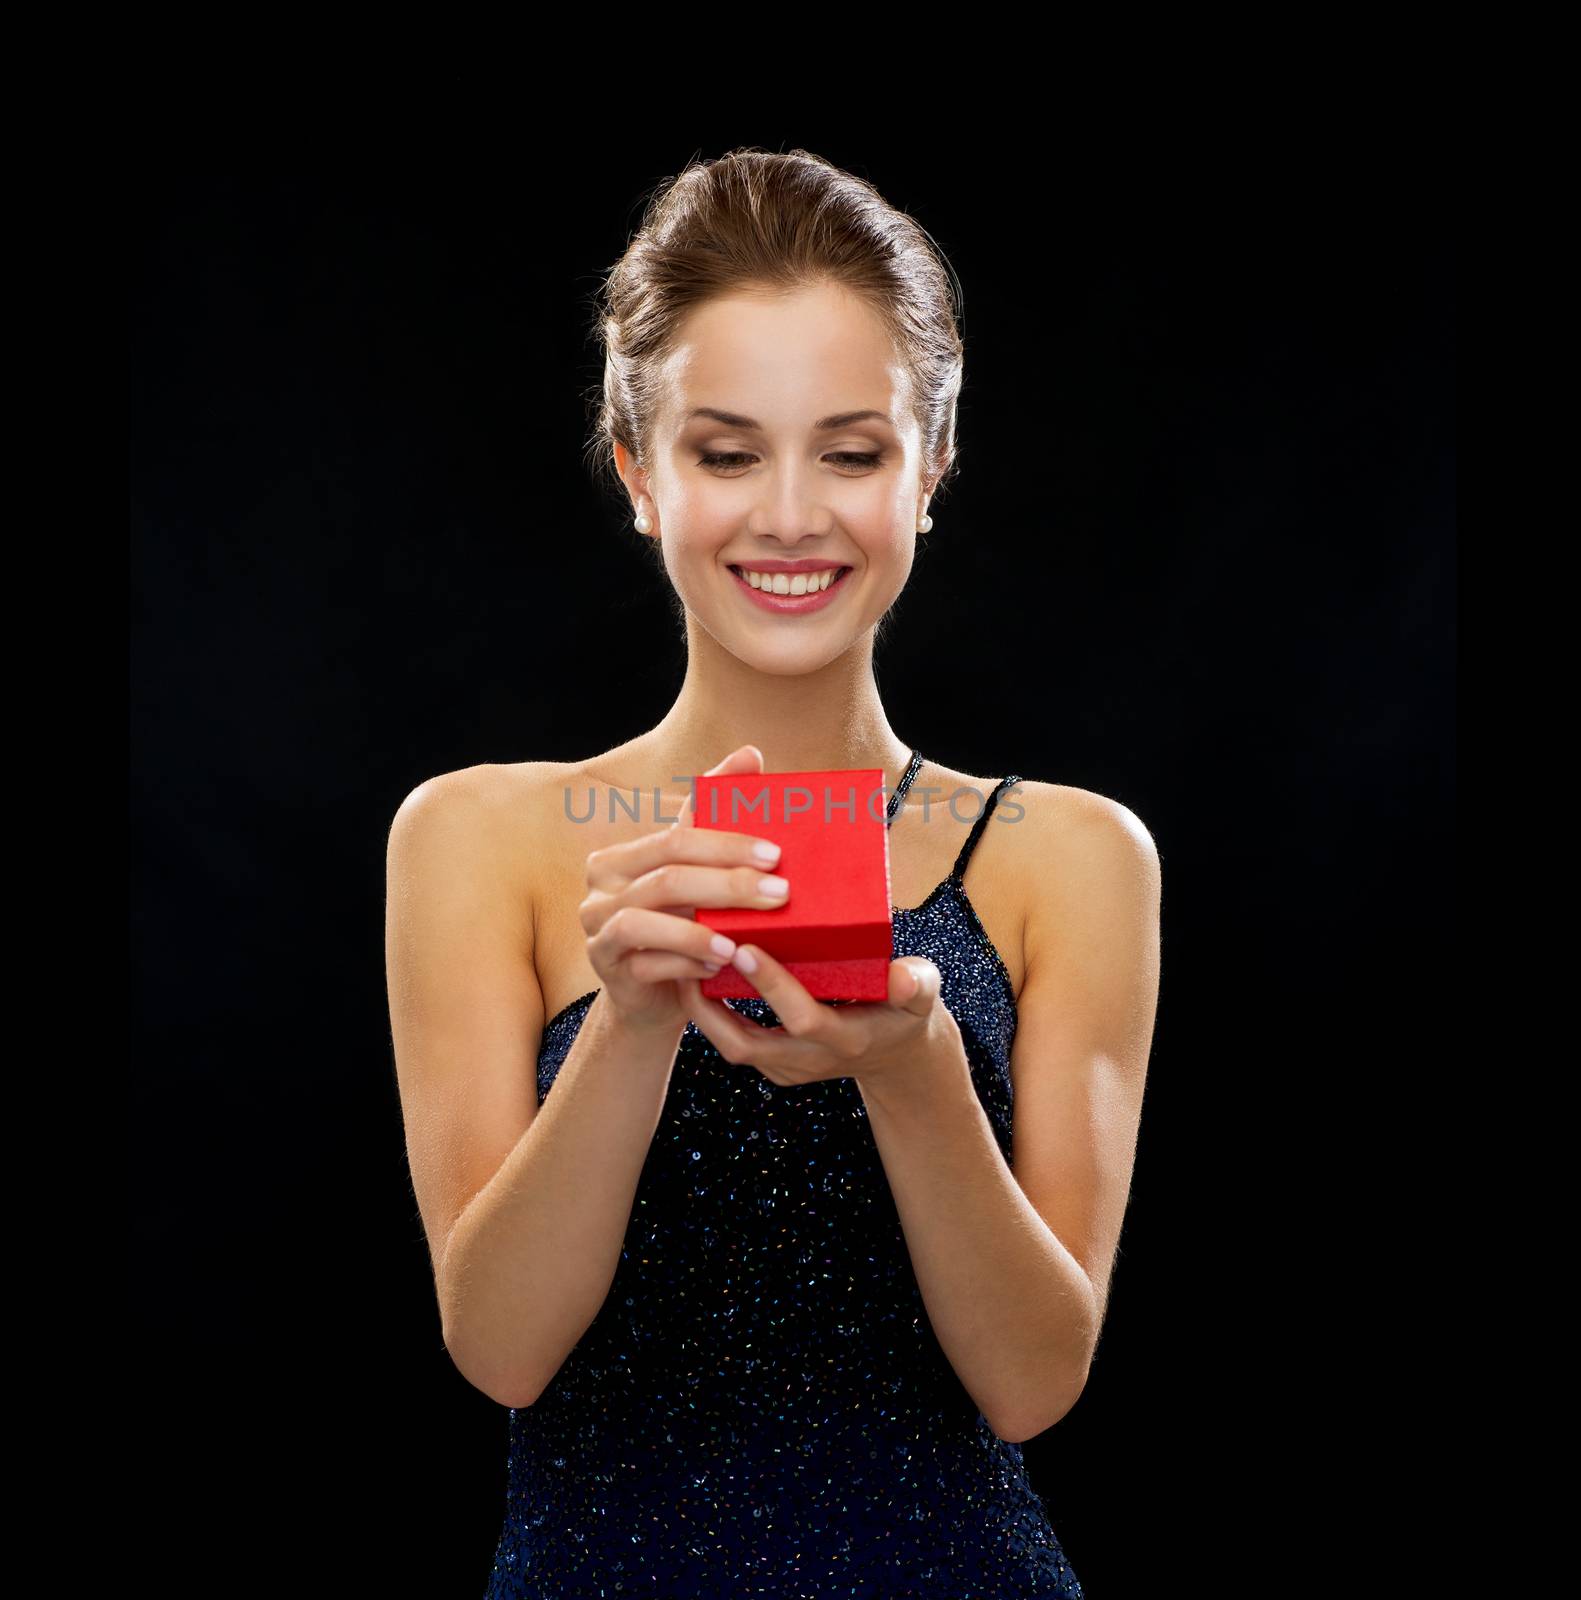 smiling woman holding red gift box by dolgachov